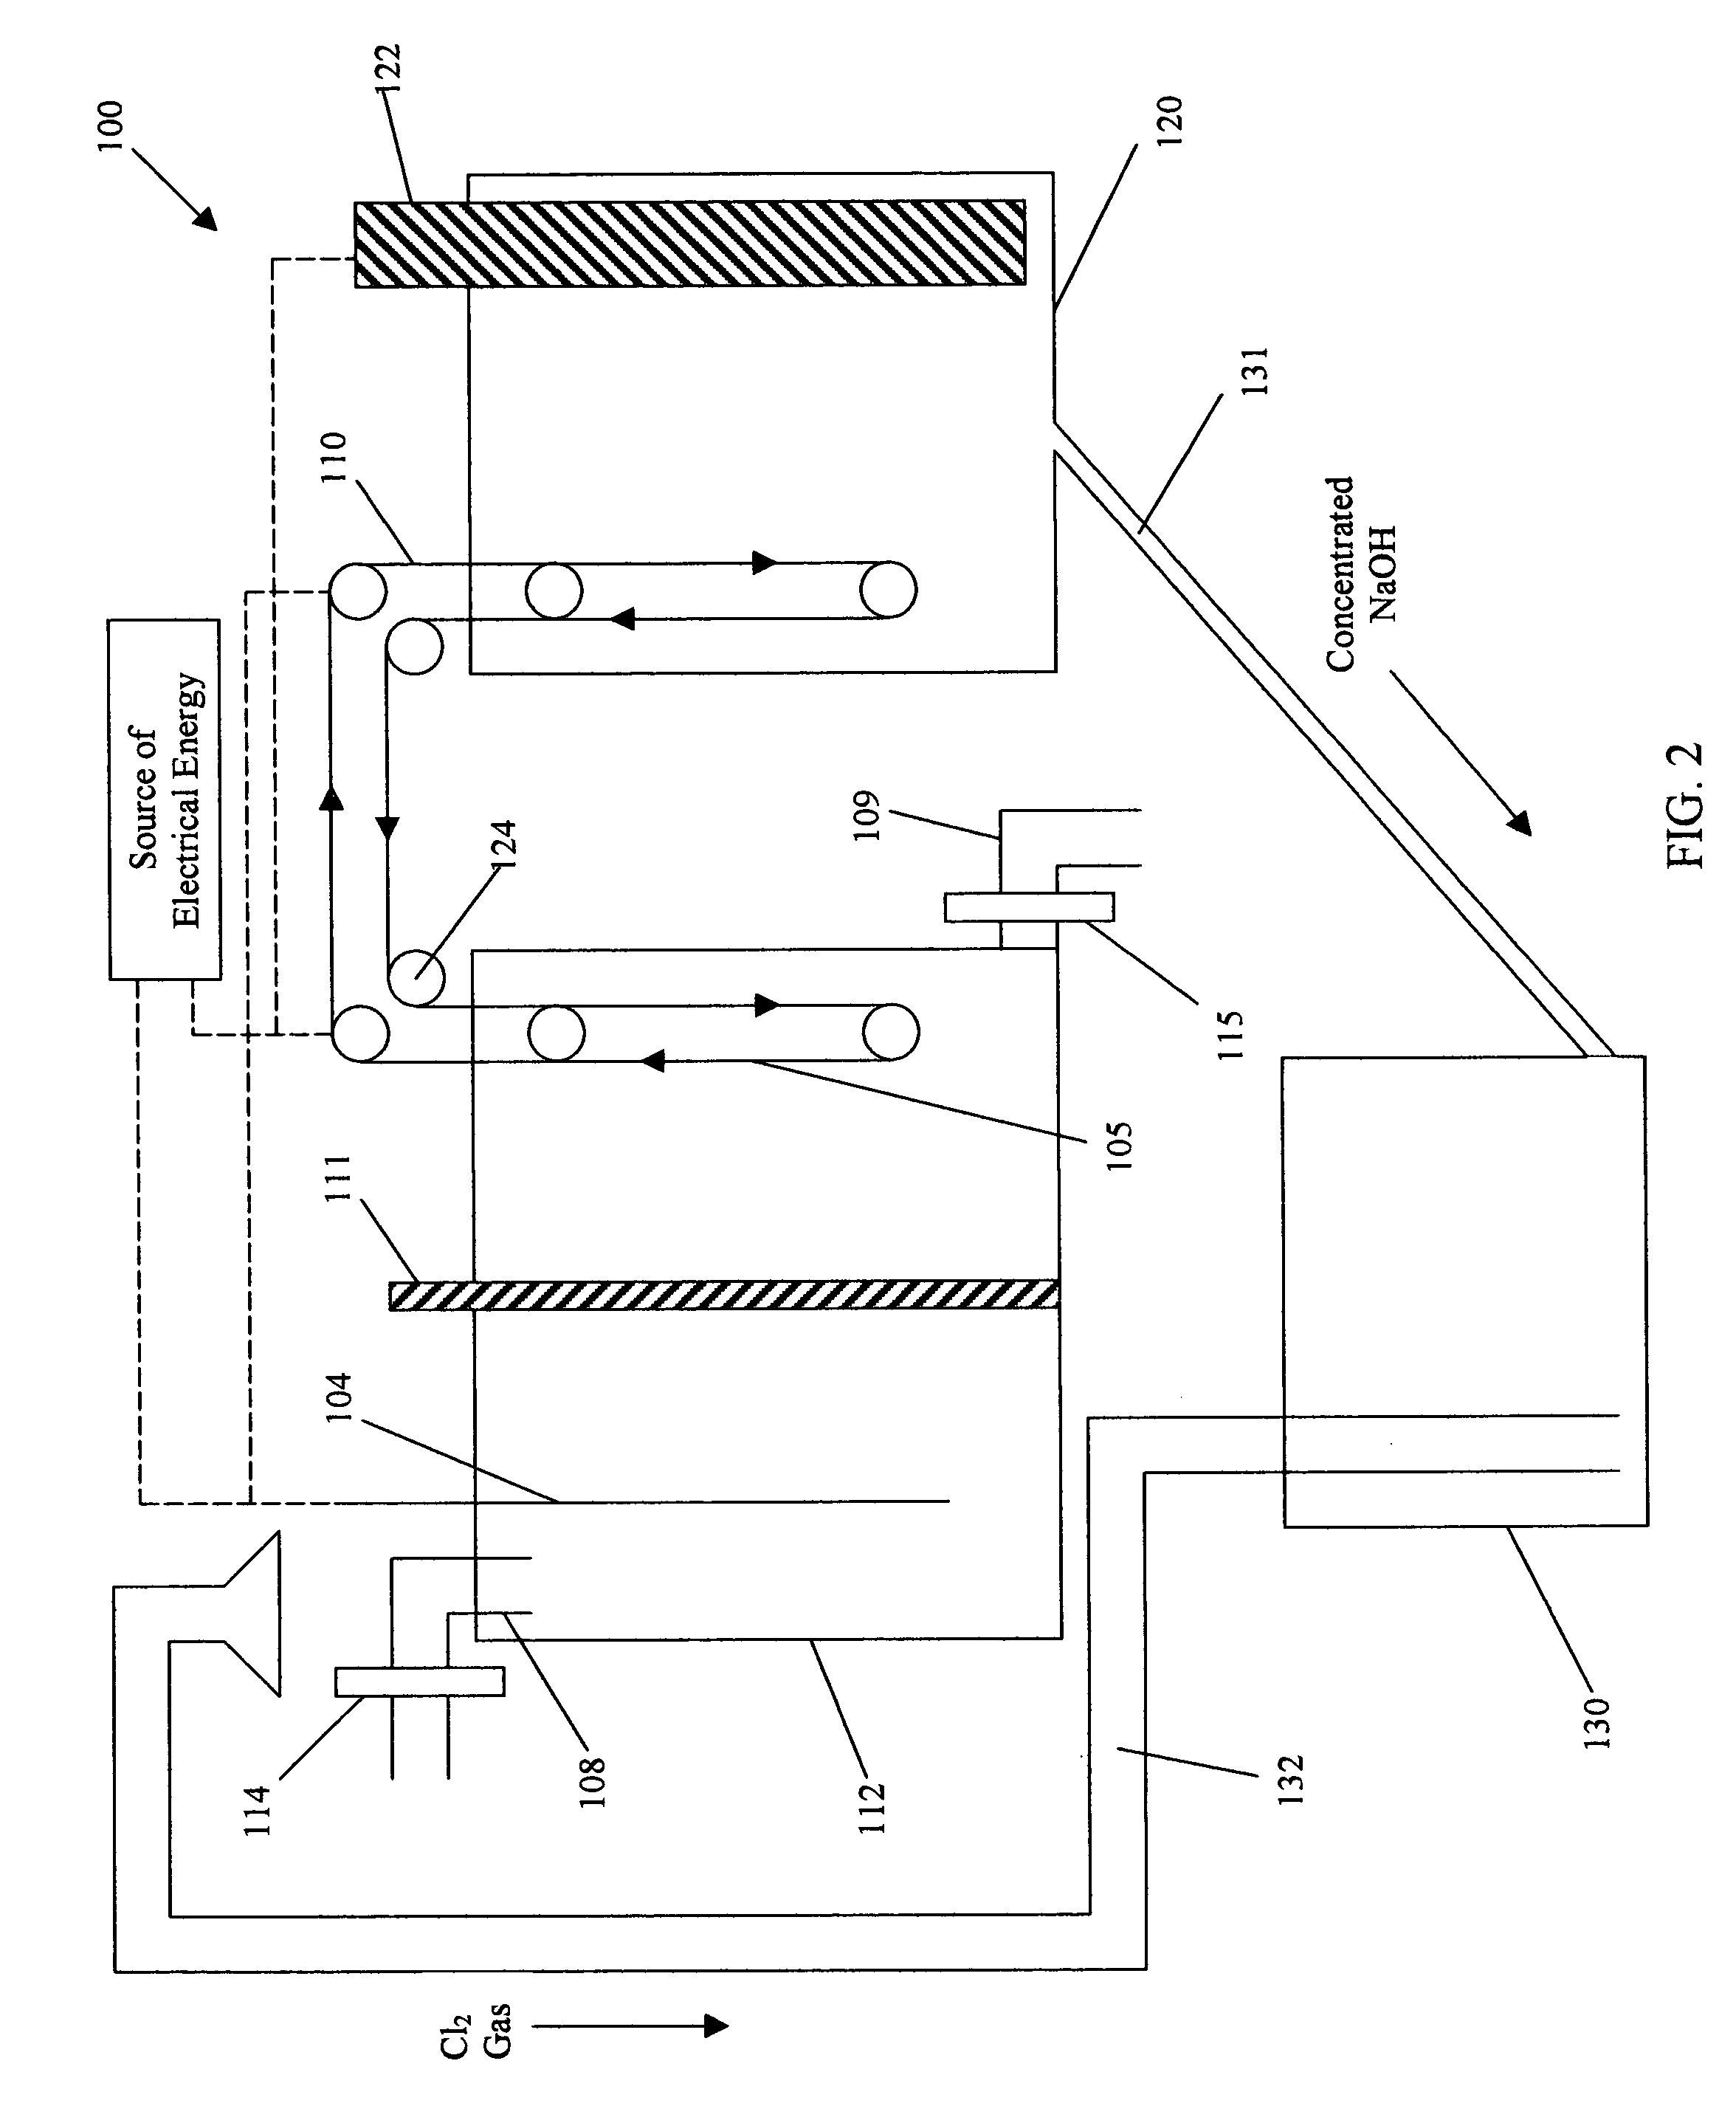 Process and apparatus for removing chloride and sodium ions from an aqueous sodium chloride solution